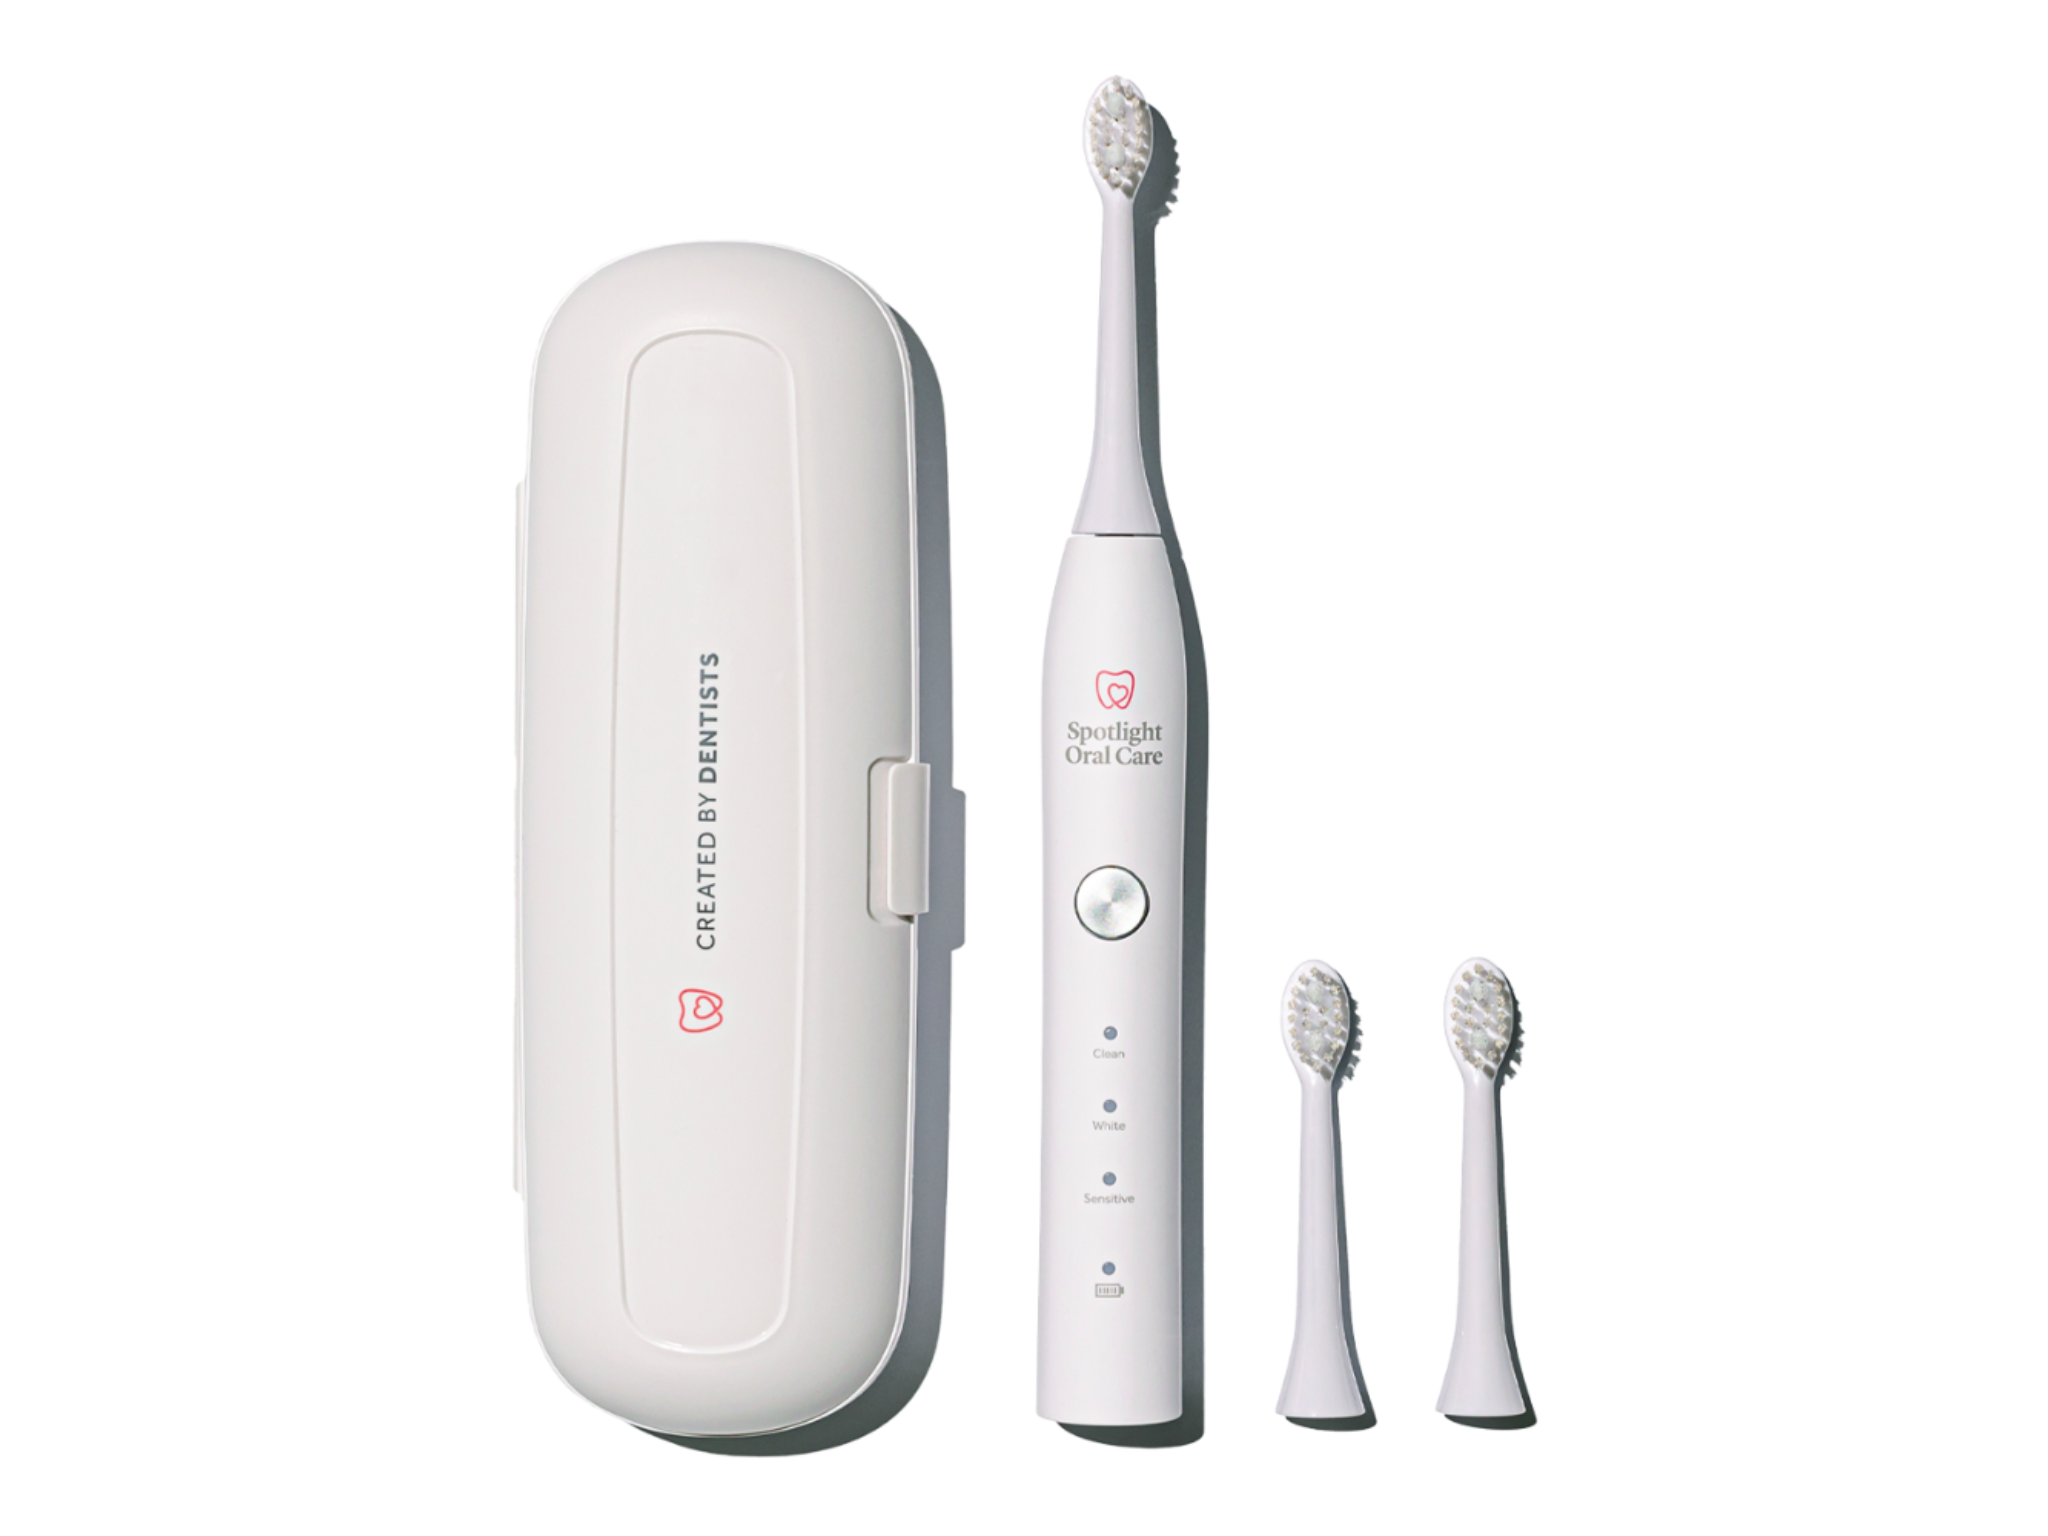 spotlight-oral-care-toothbrush review indybest.png